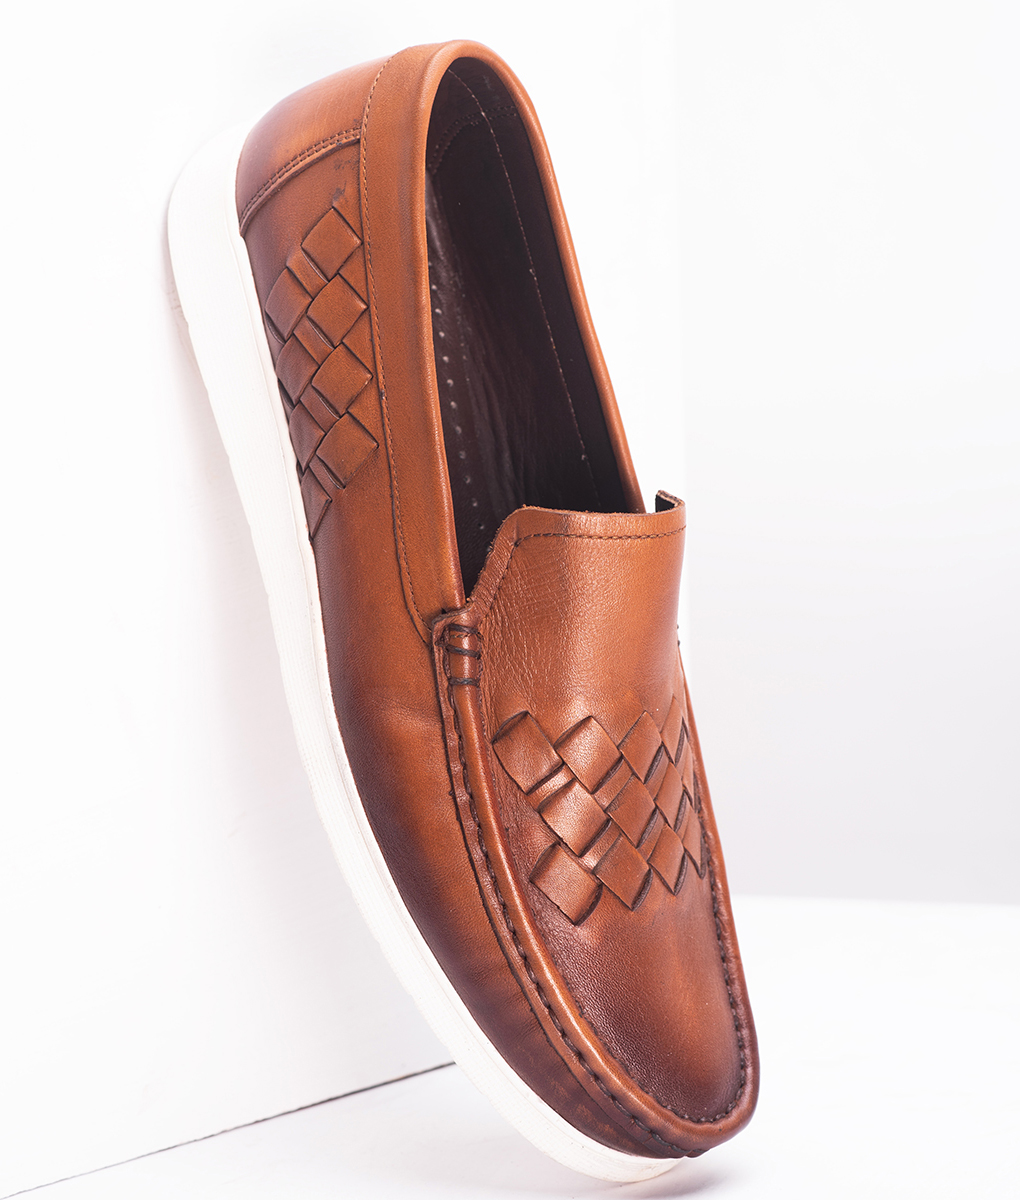 Turkey Made Brown Leather Shoes for Men